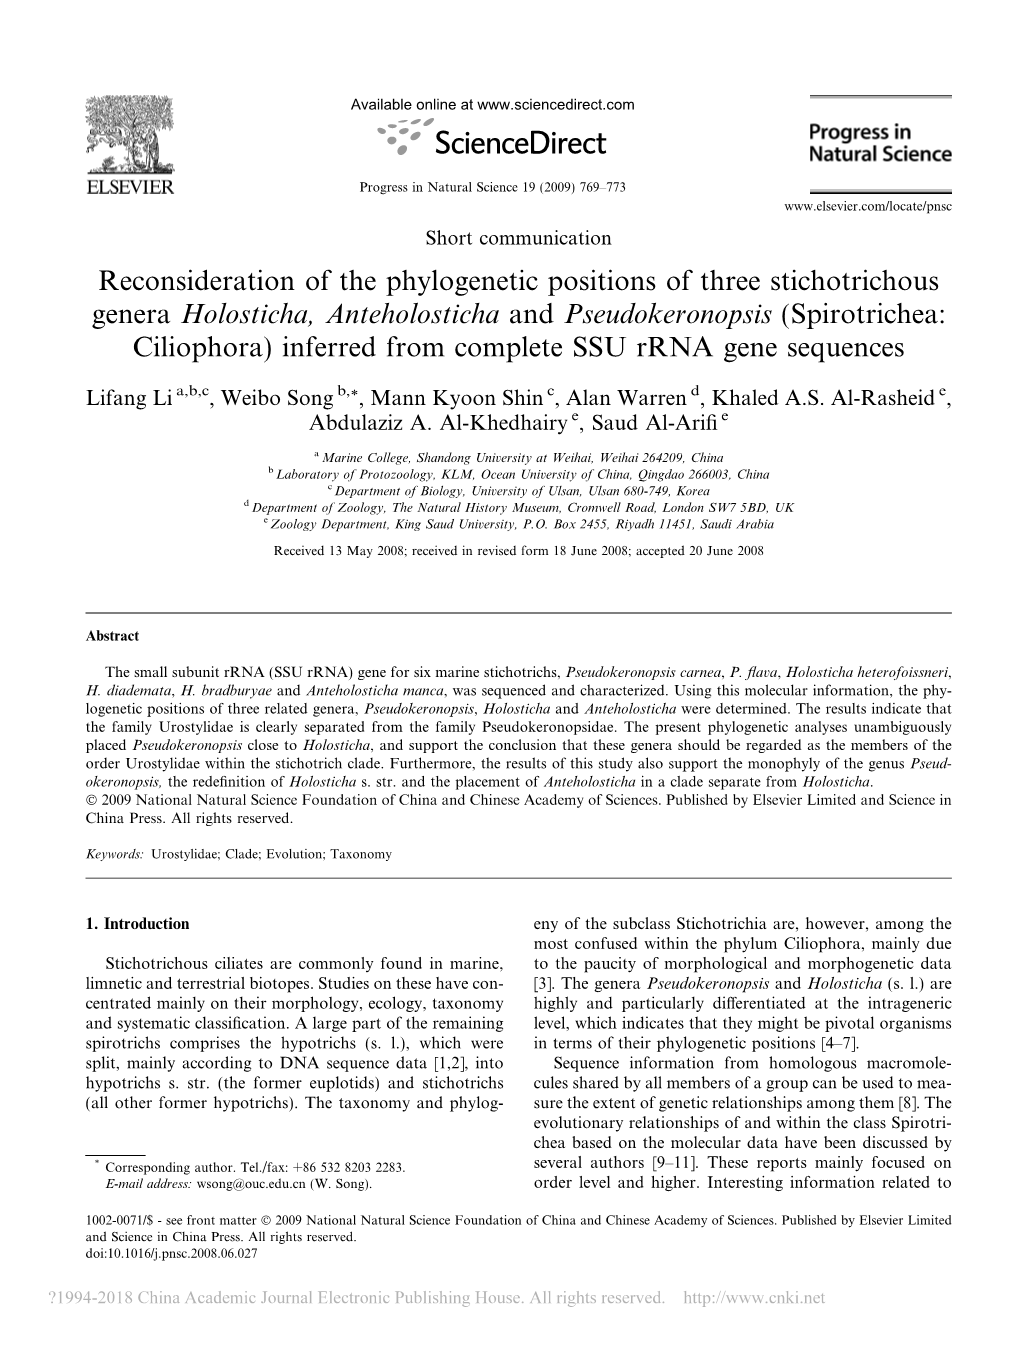 Reconsideration of the Phylogenetic Positions of Three Stichotrichous